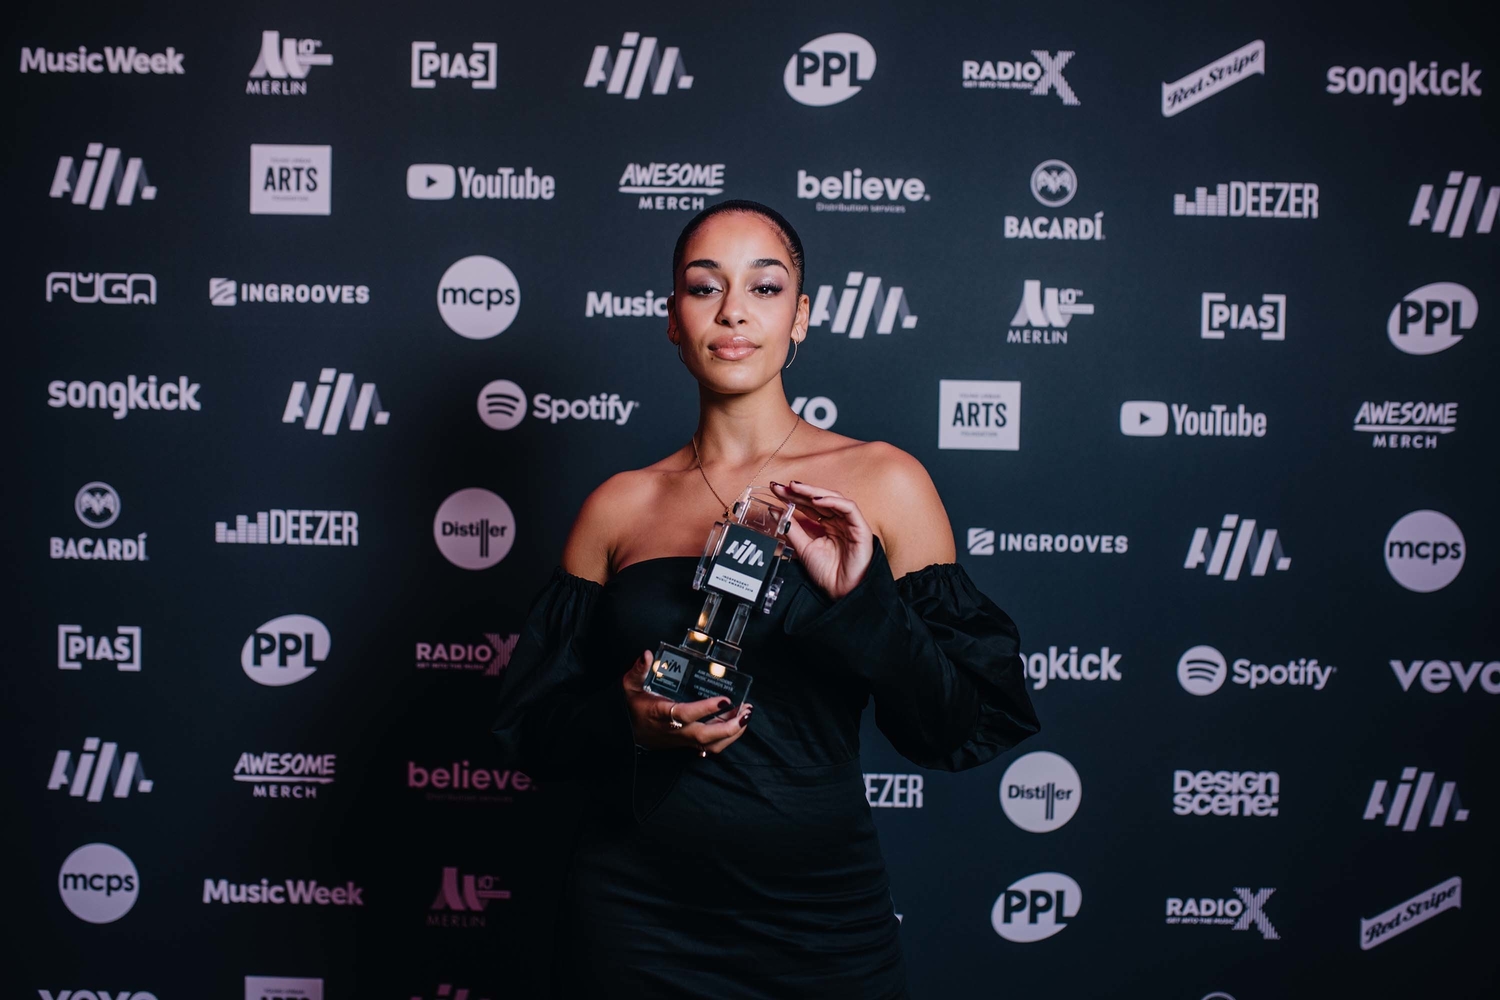 Jorja Smith, IDLES, Phoebe Bridgers, Nadine Shah and more among winners at the AIM Independent Music Awards 2018